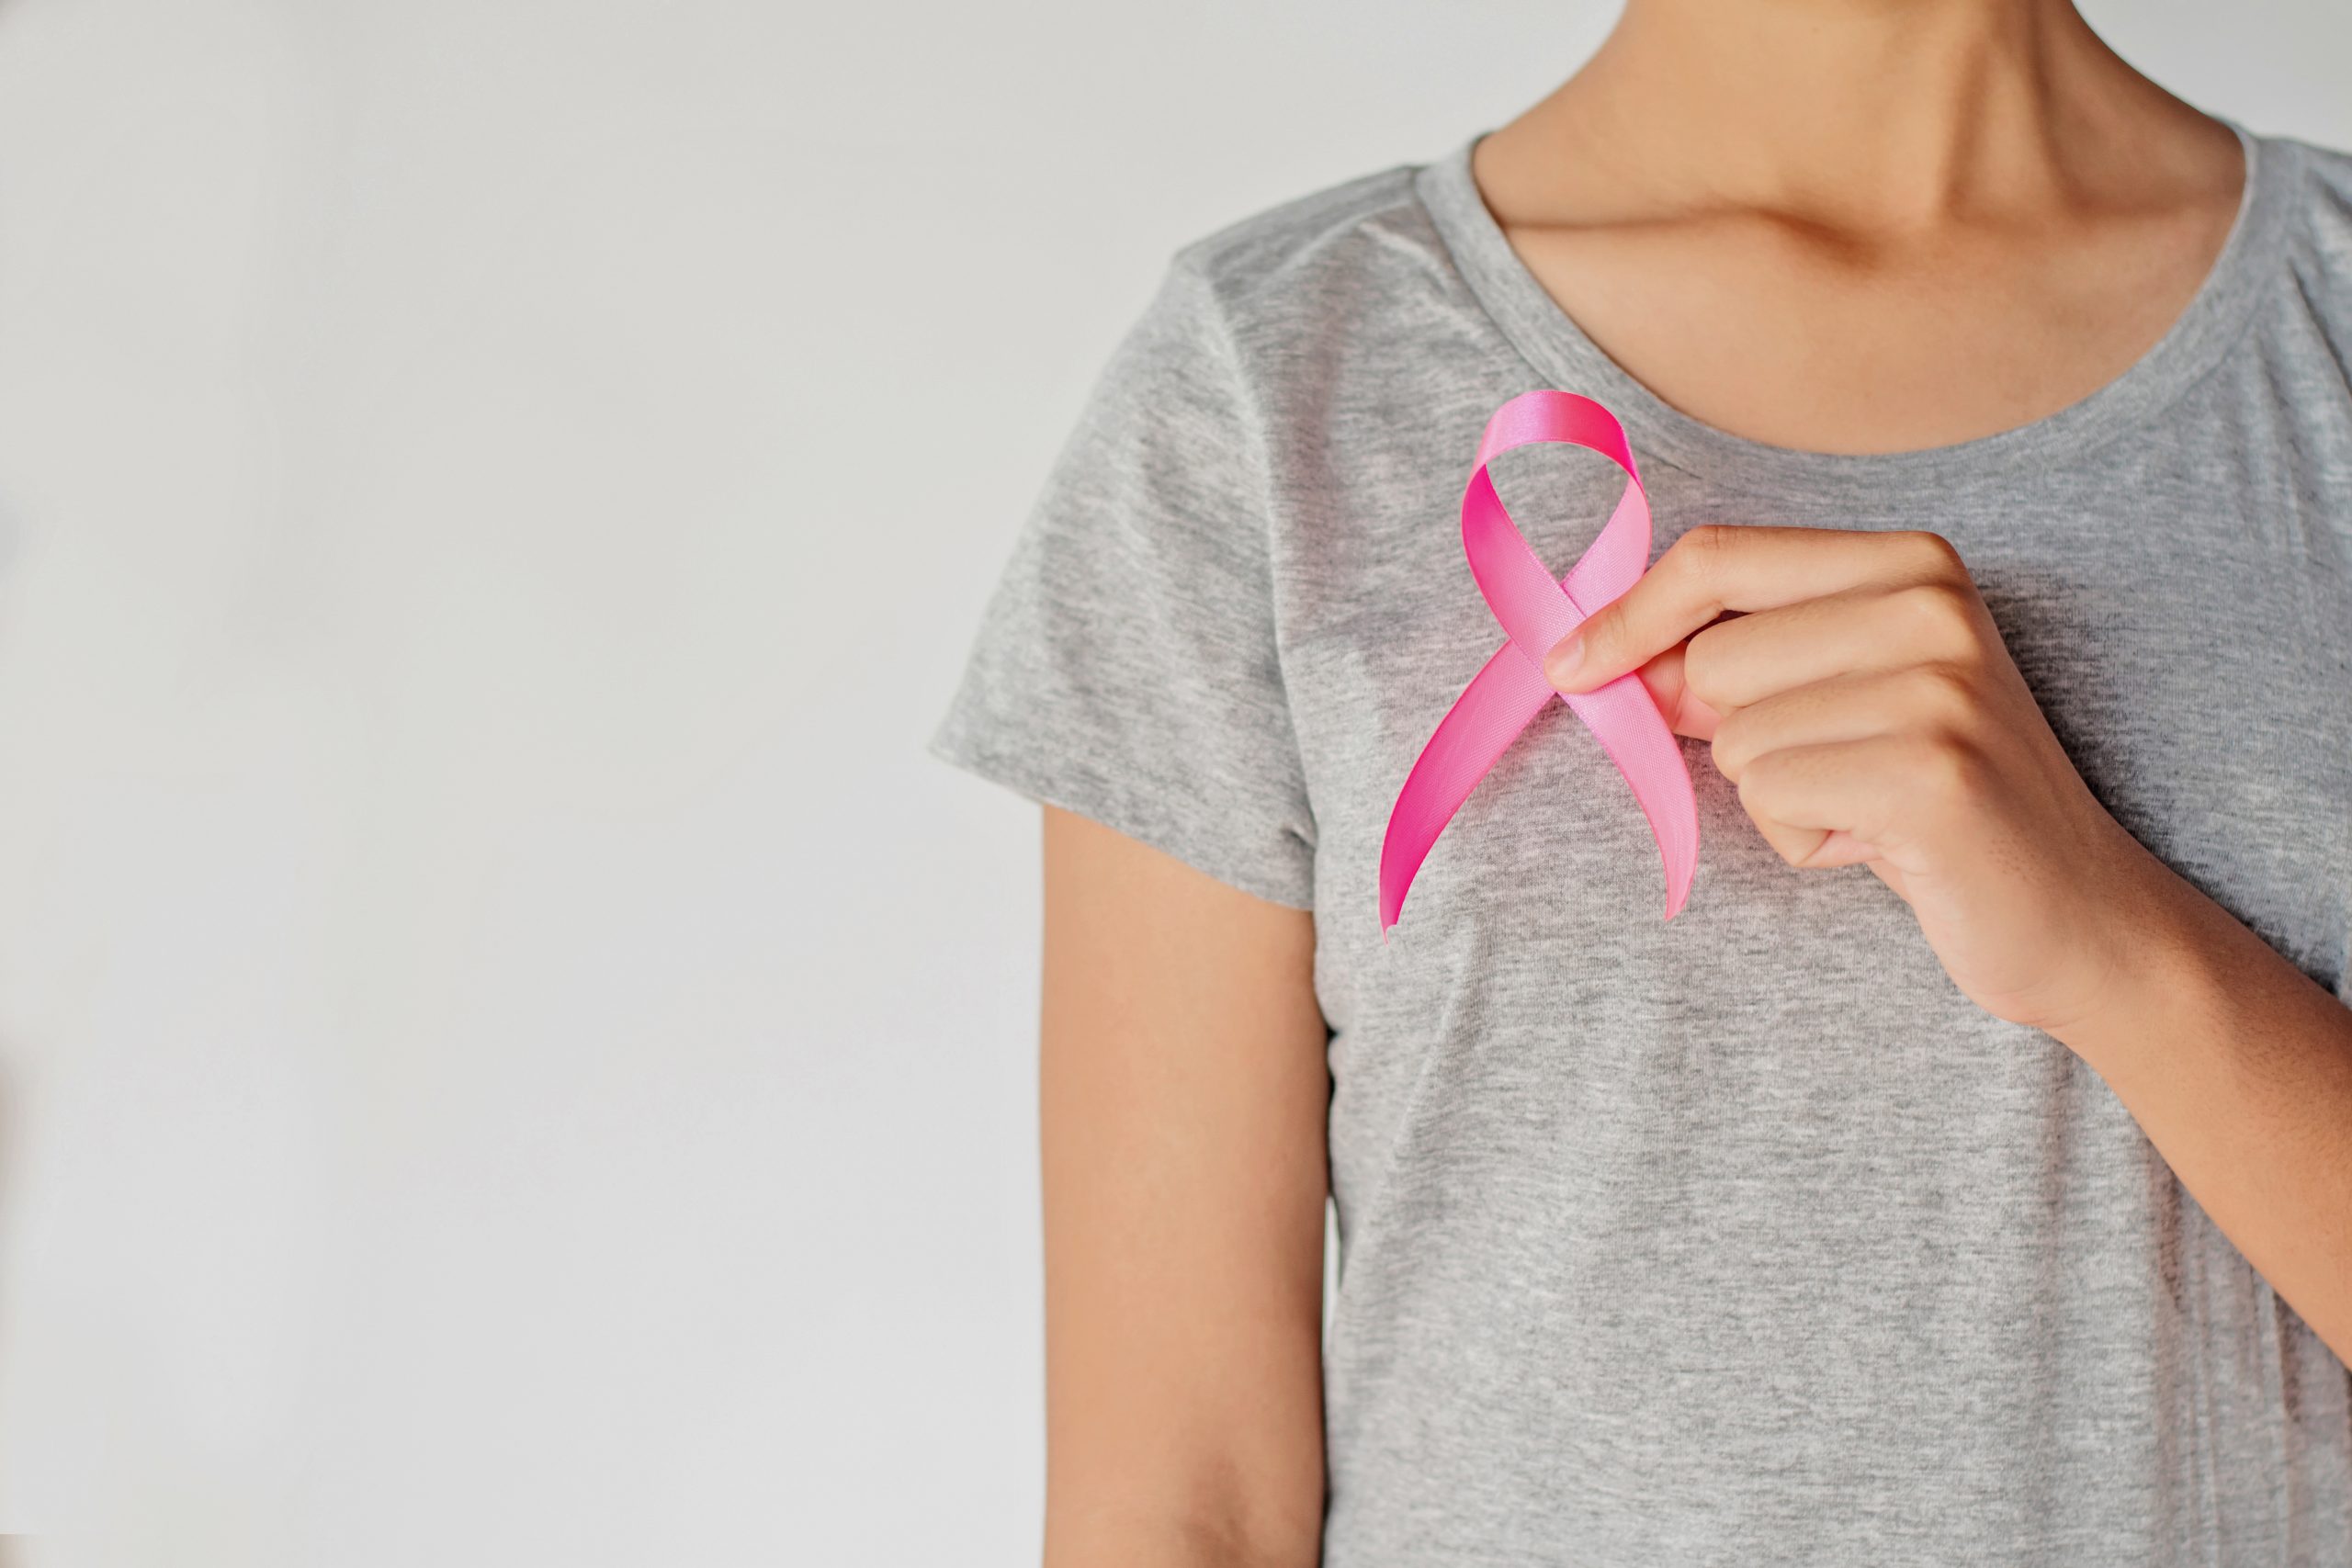 Body Fat more Important than BMI in Breast Cancer